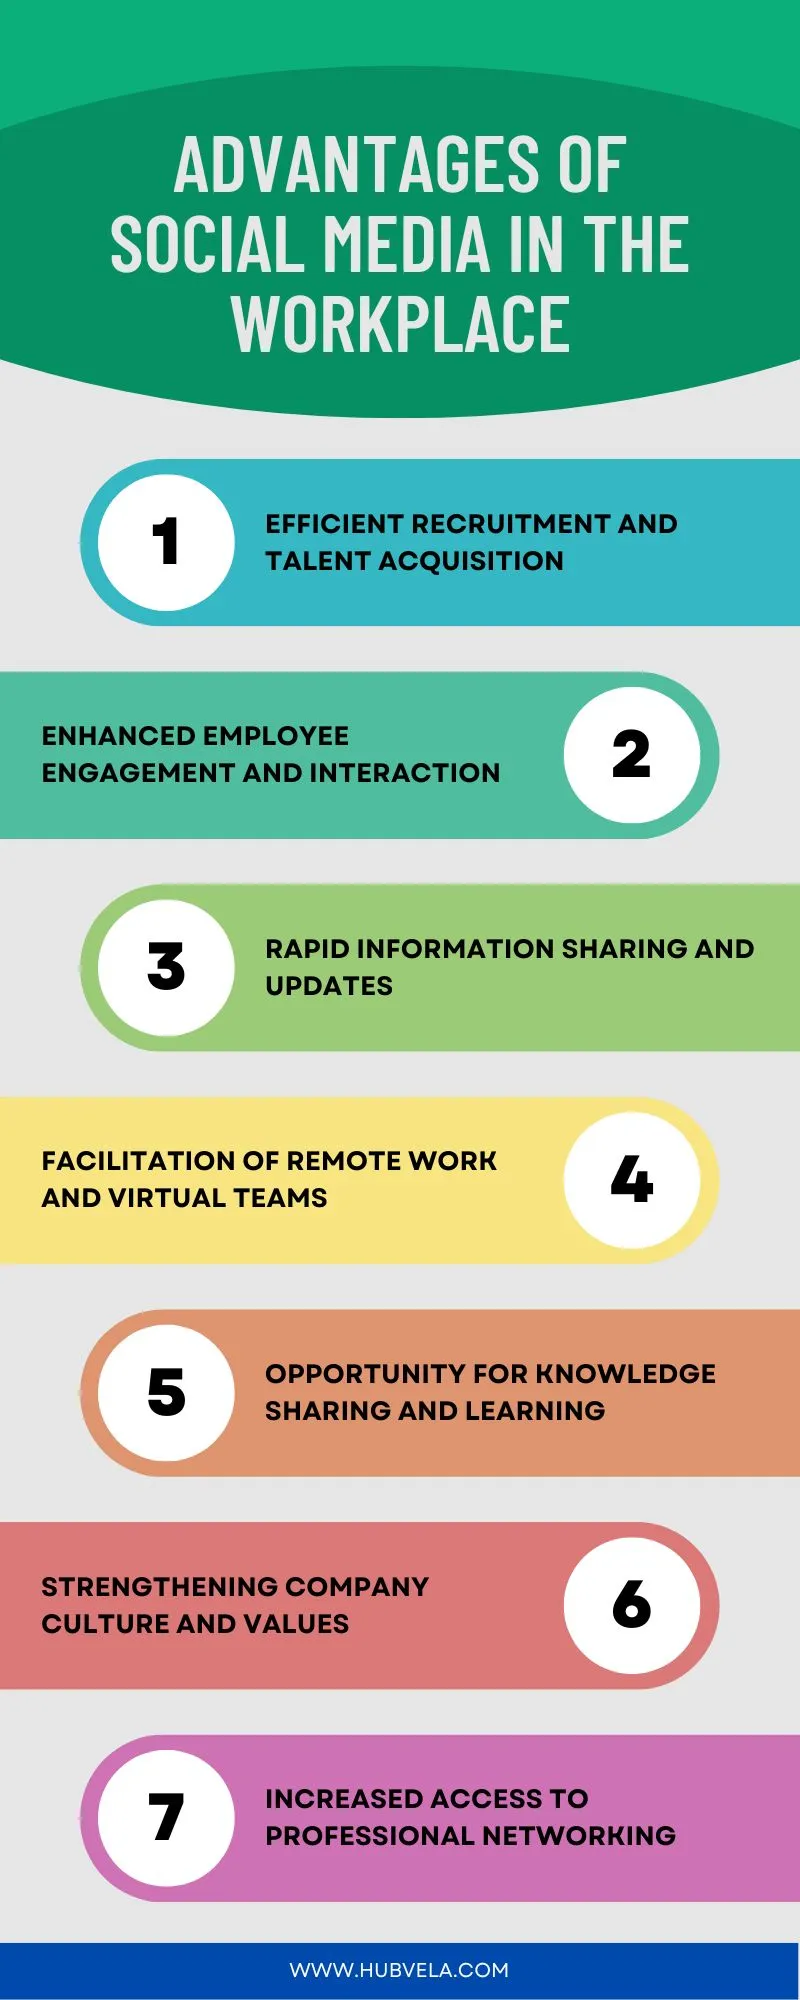 Advantages of Social Media in The Workplace infographic